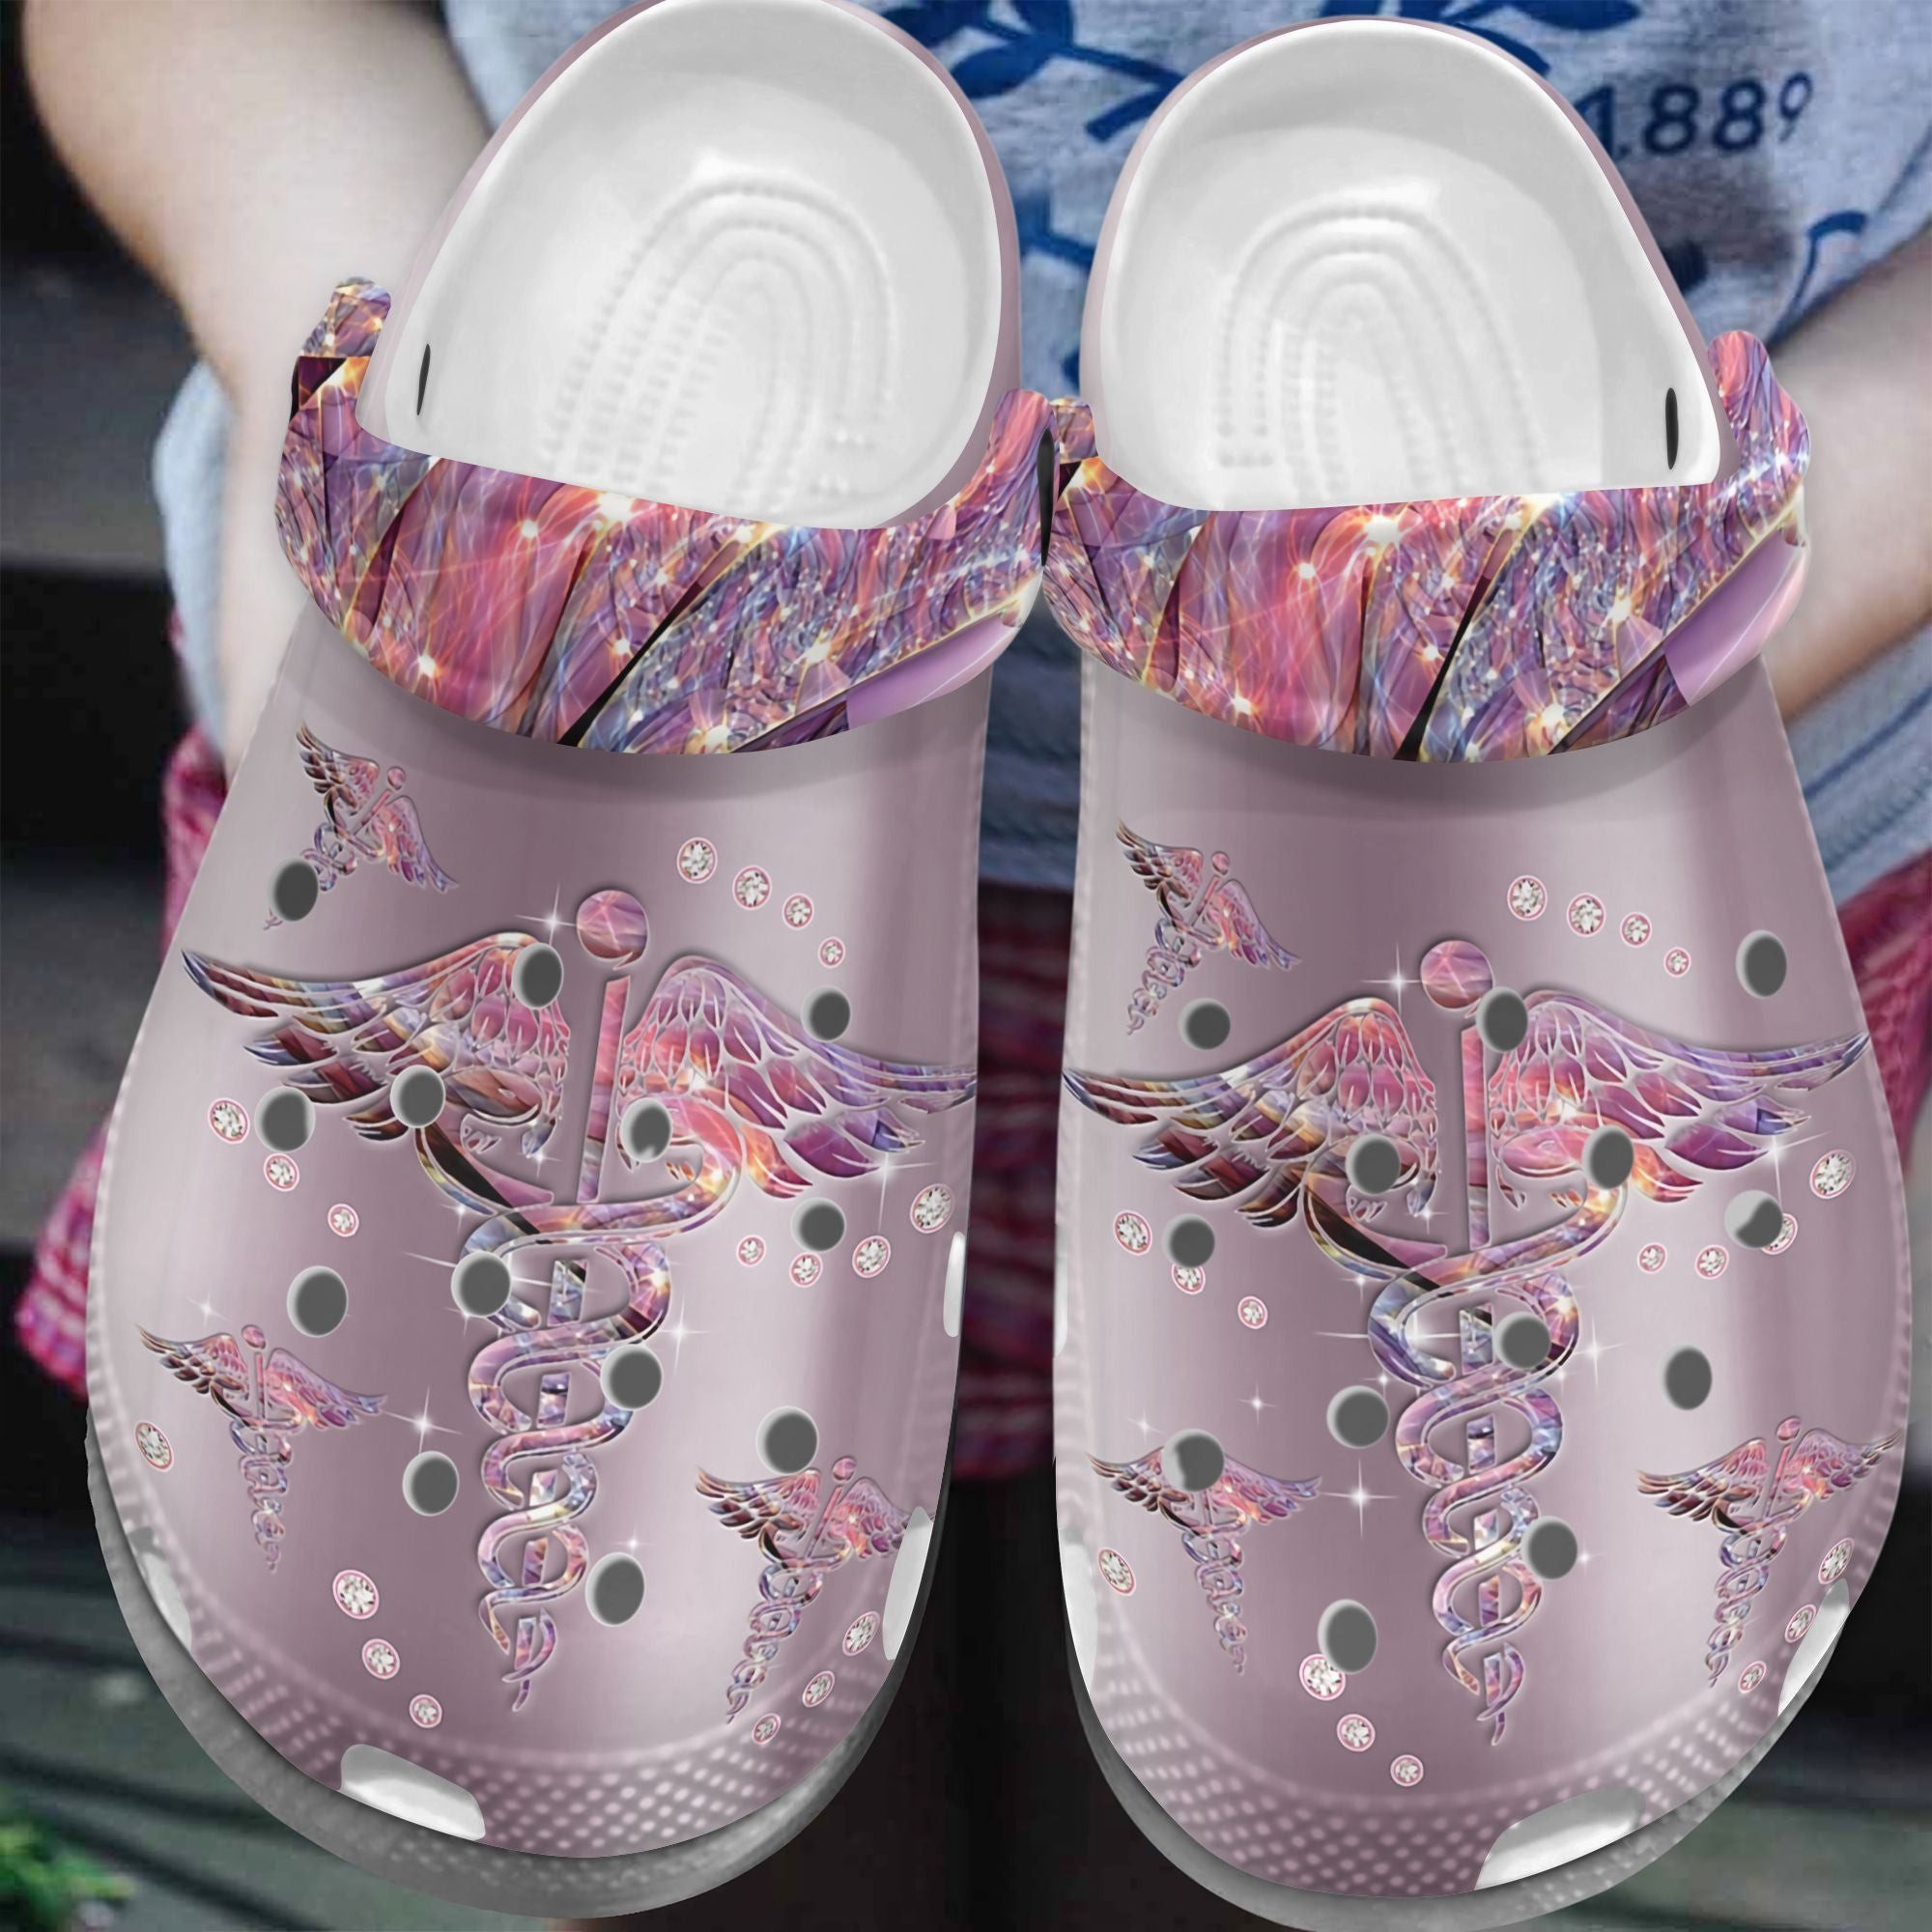 Magical World For Nurse Crocs Clog Shoes - Angel Wings Outdoor Crocs Clog Shoes Birthday Gift For Women Girl Mother Daughter Sister Friend